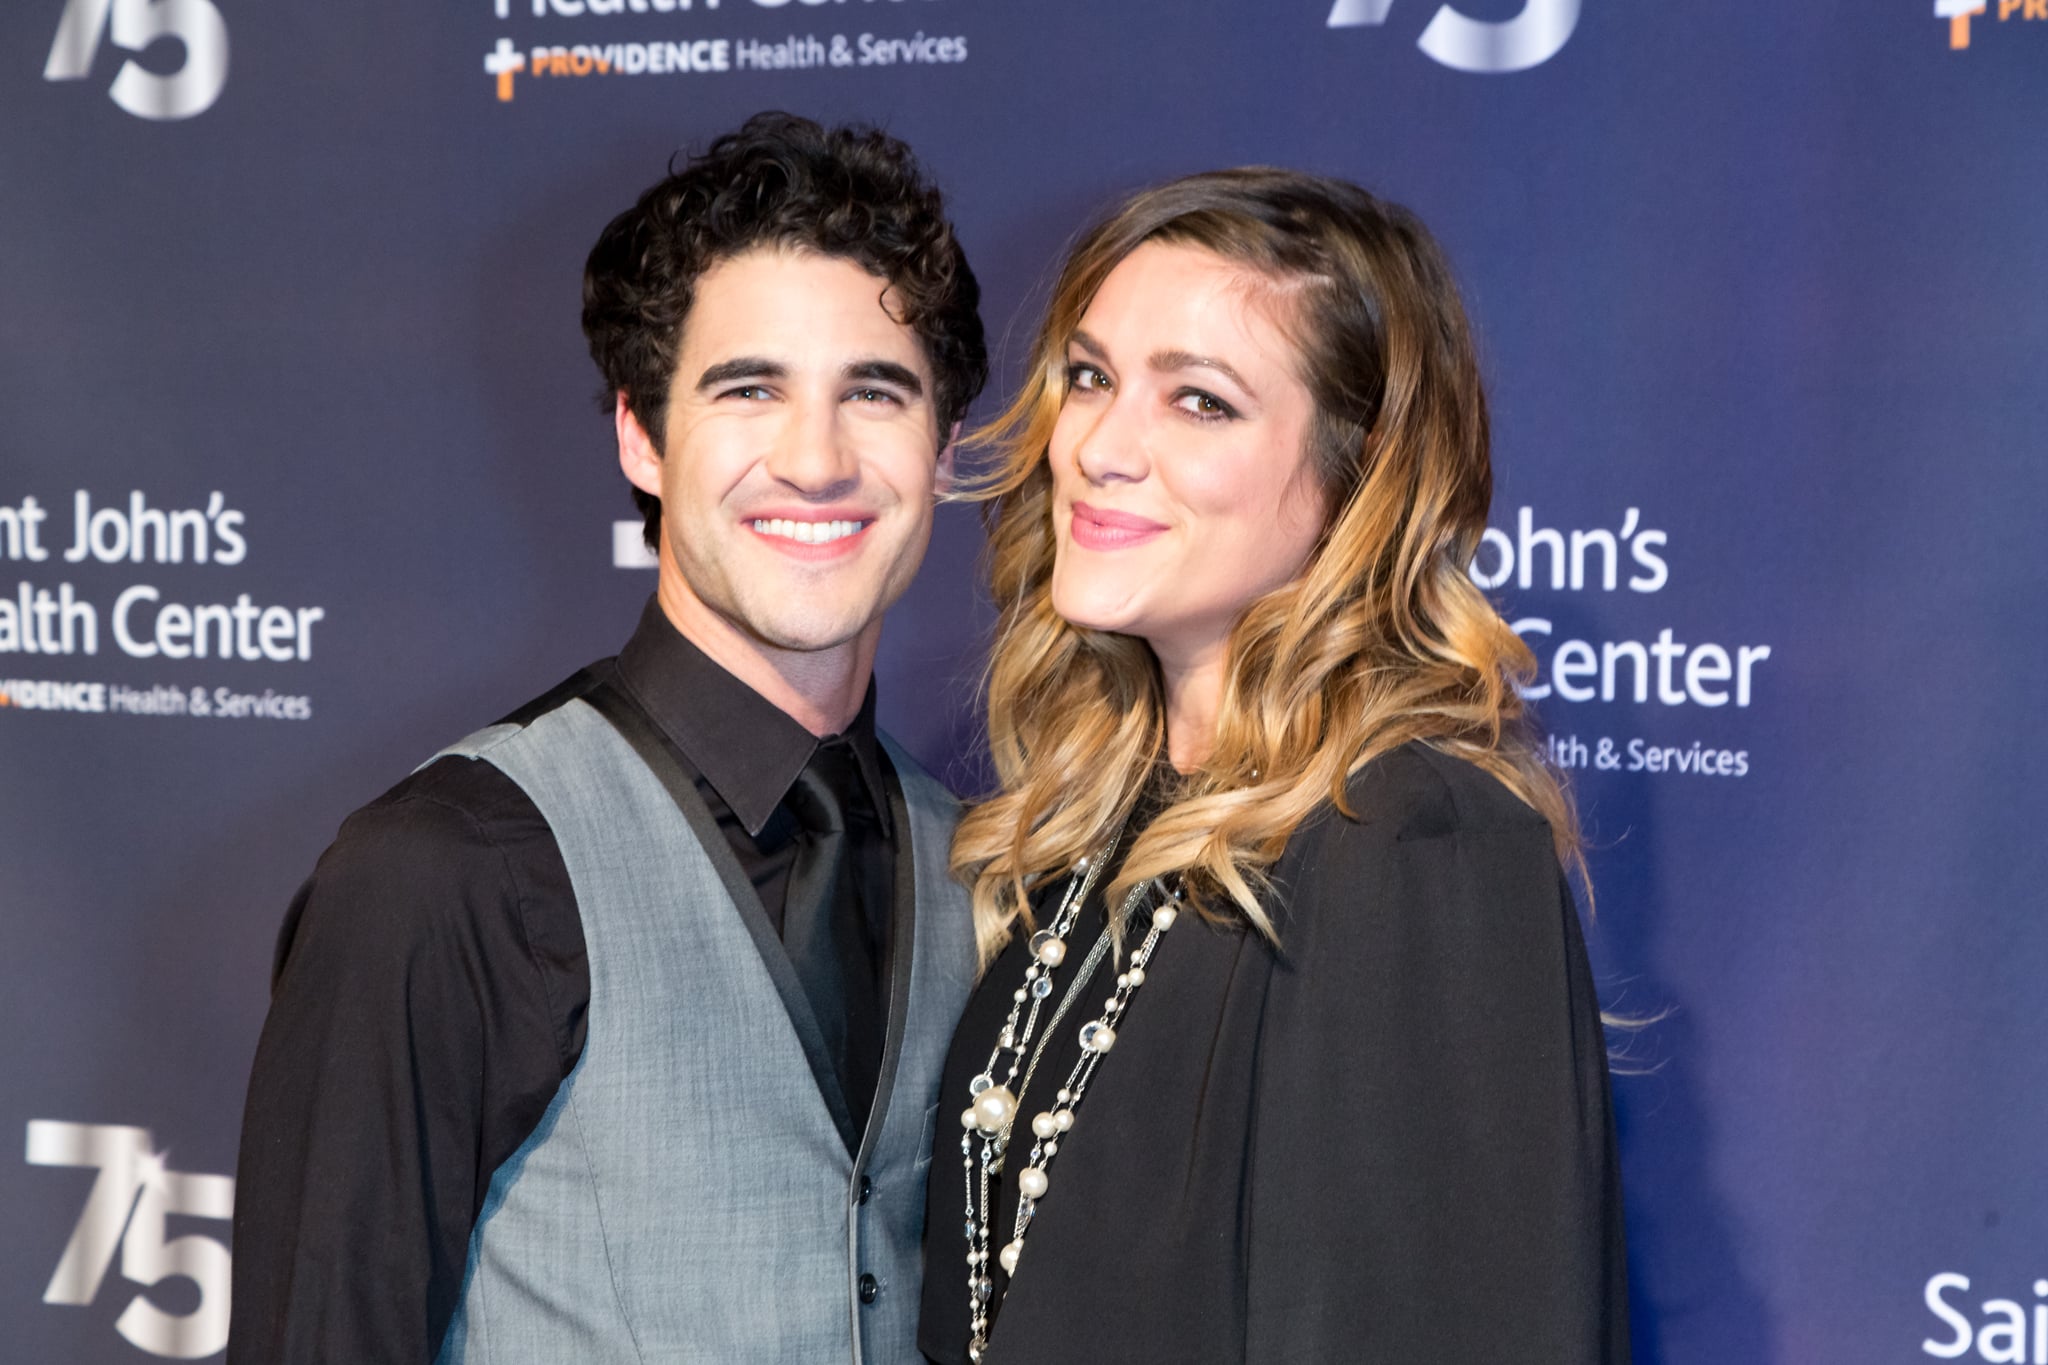 CULVER CITY, CA - OCTOBER 21:  Singer-songwriter Darren Criss and Director Mia Swier attend the Saint John's Health Center Foundation's 75th Anniversary Gala Celebration at 3LABS on October 21, 2017 in Culver City, California.  (Photo by Greg Doherty/Getty Images,)